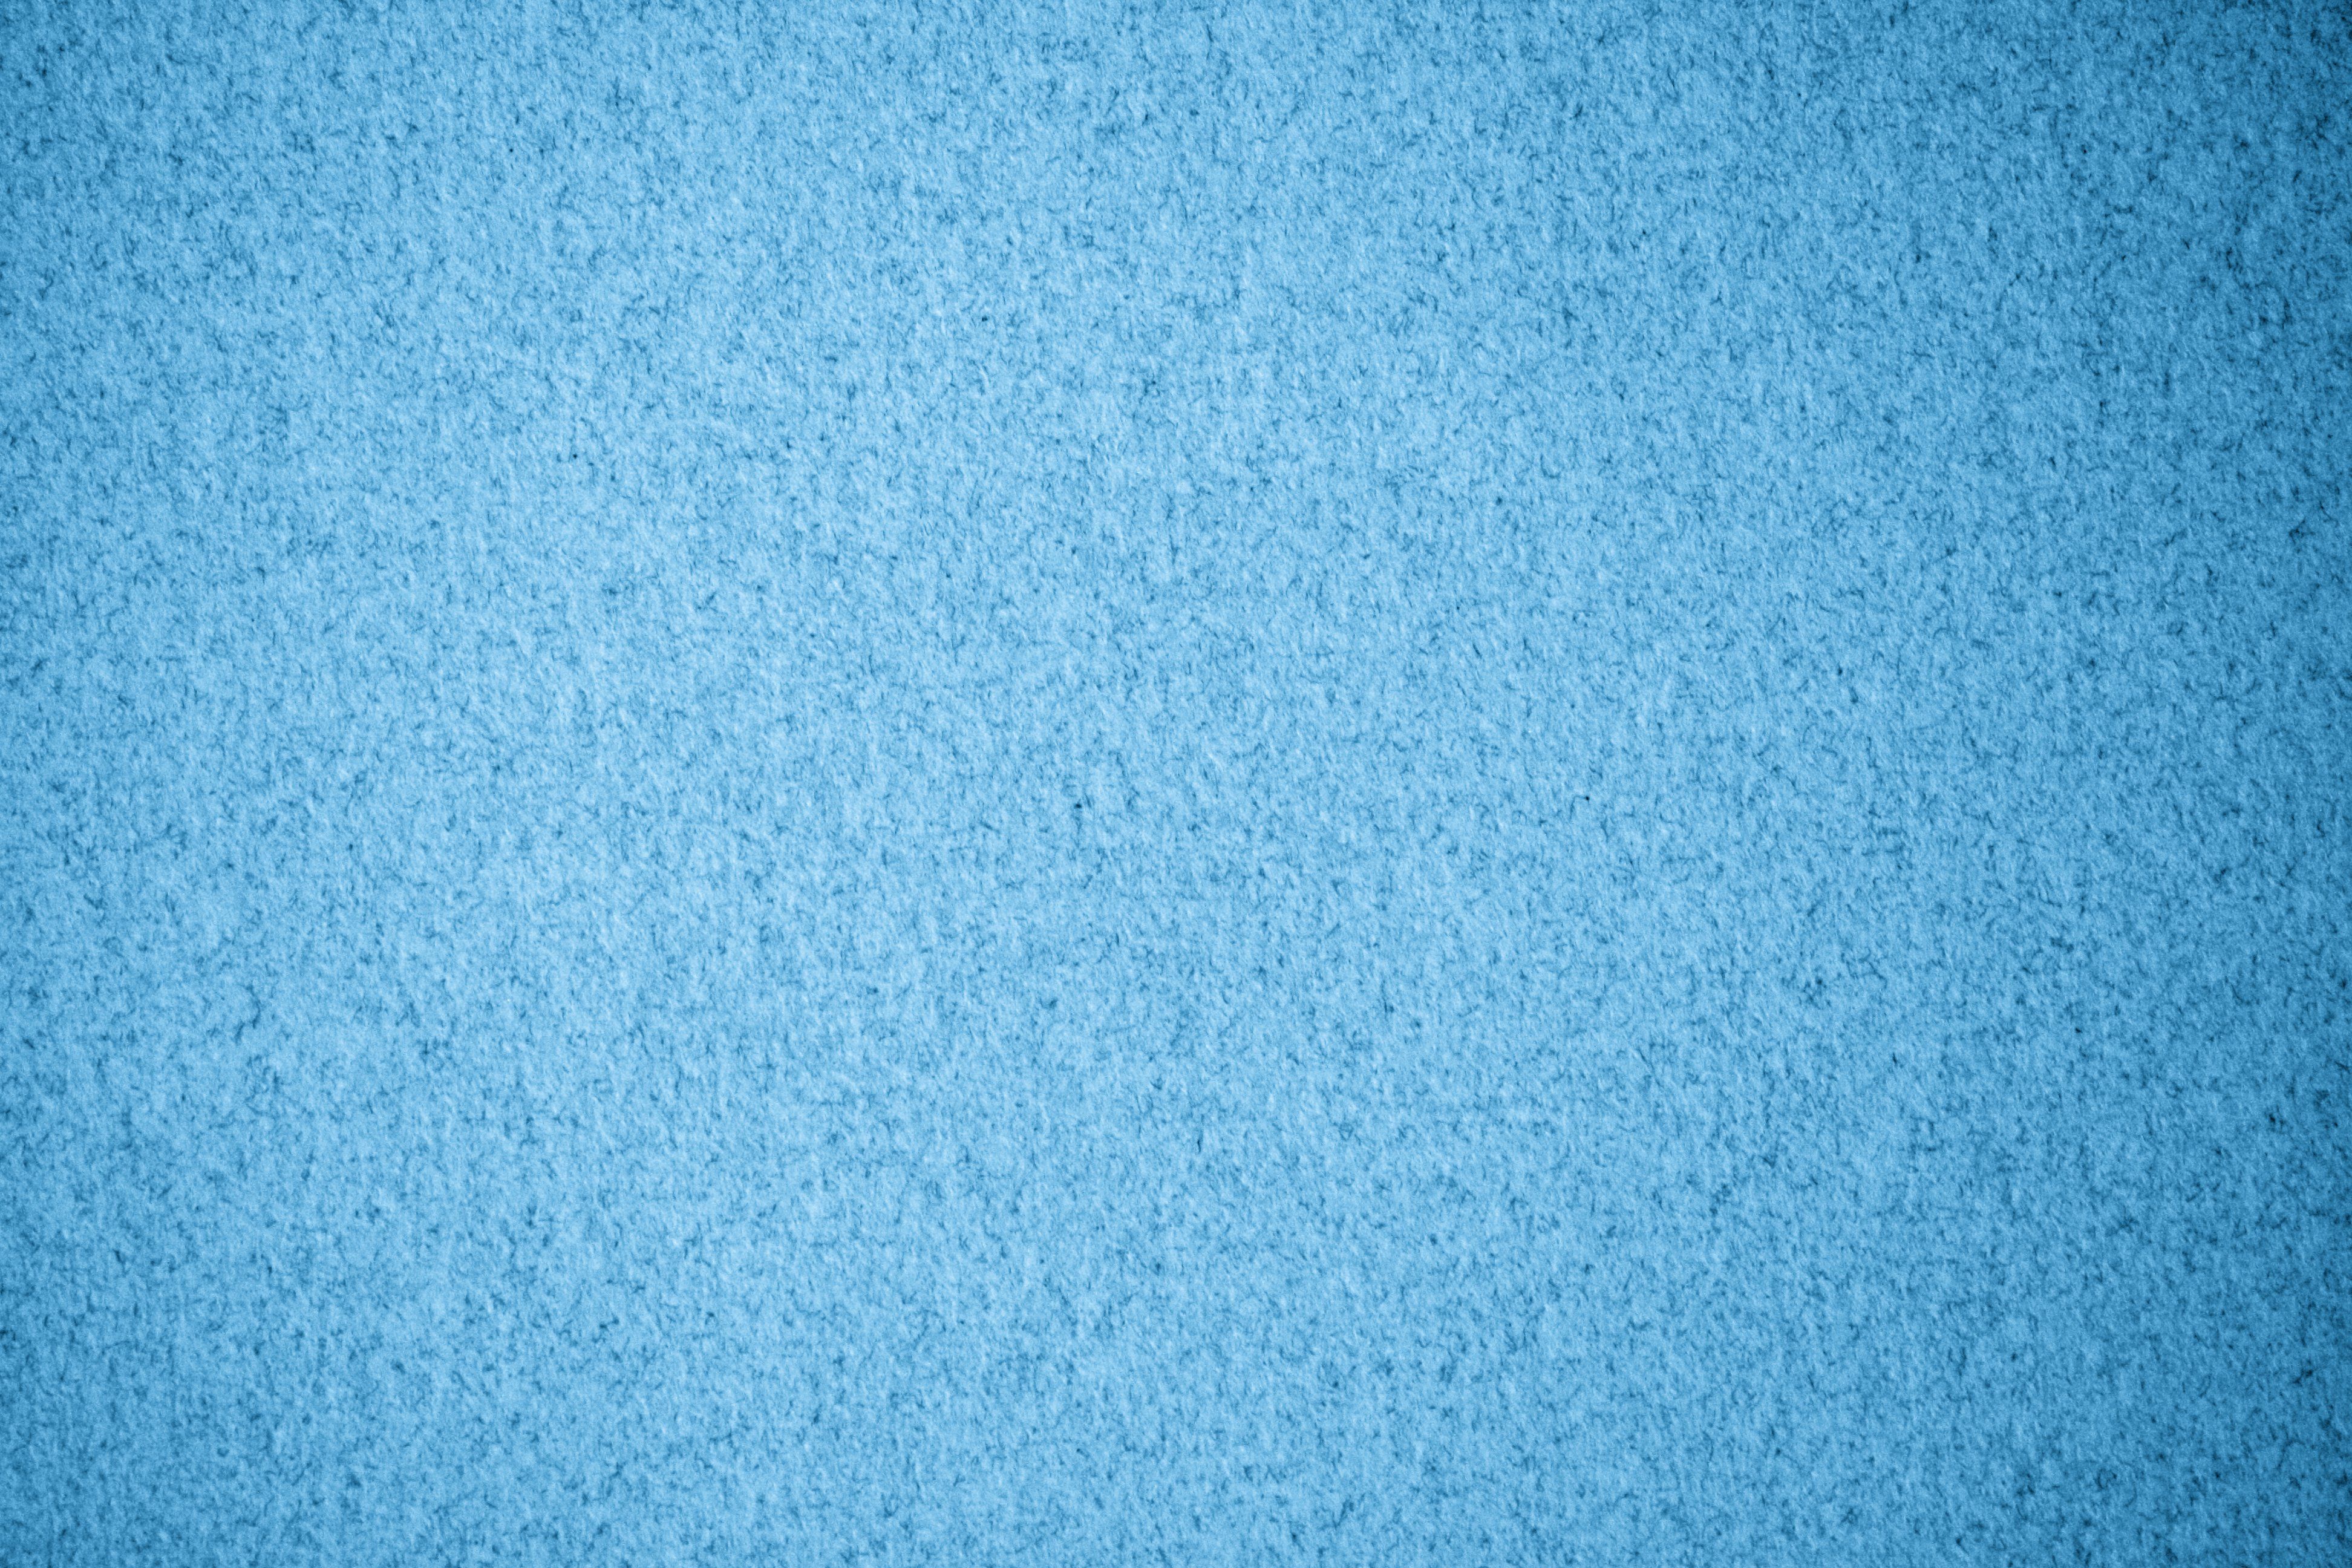 Wallpaper.wiki Sky Blue Speckled Paper Texture Picture Free